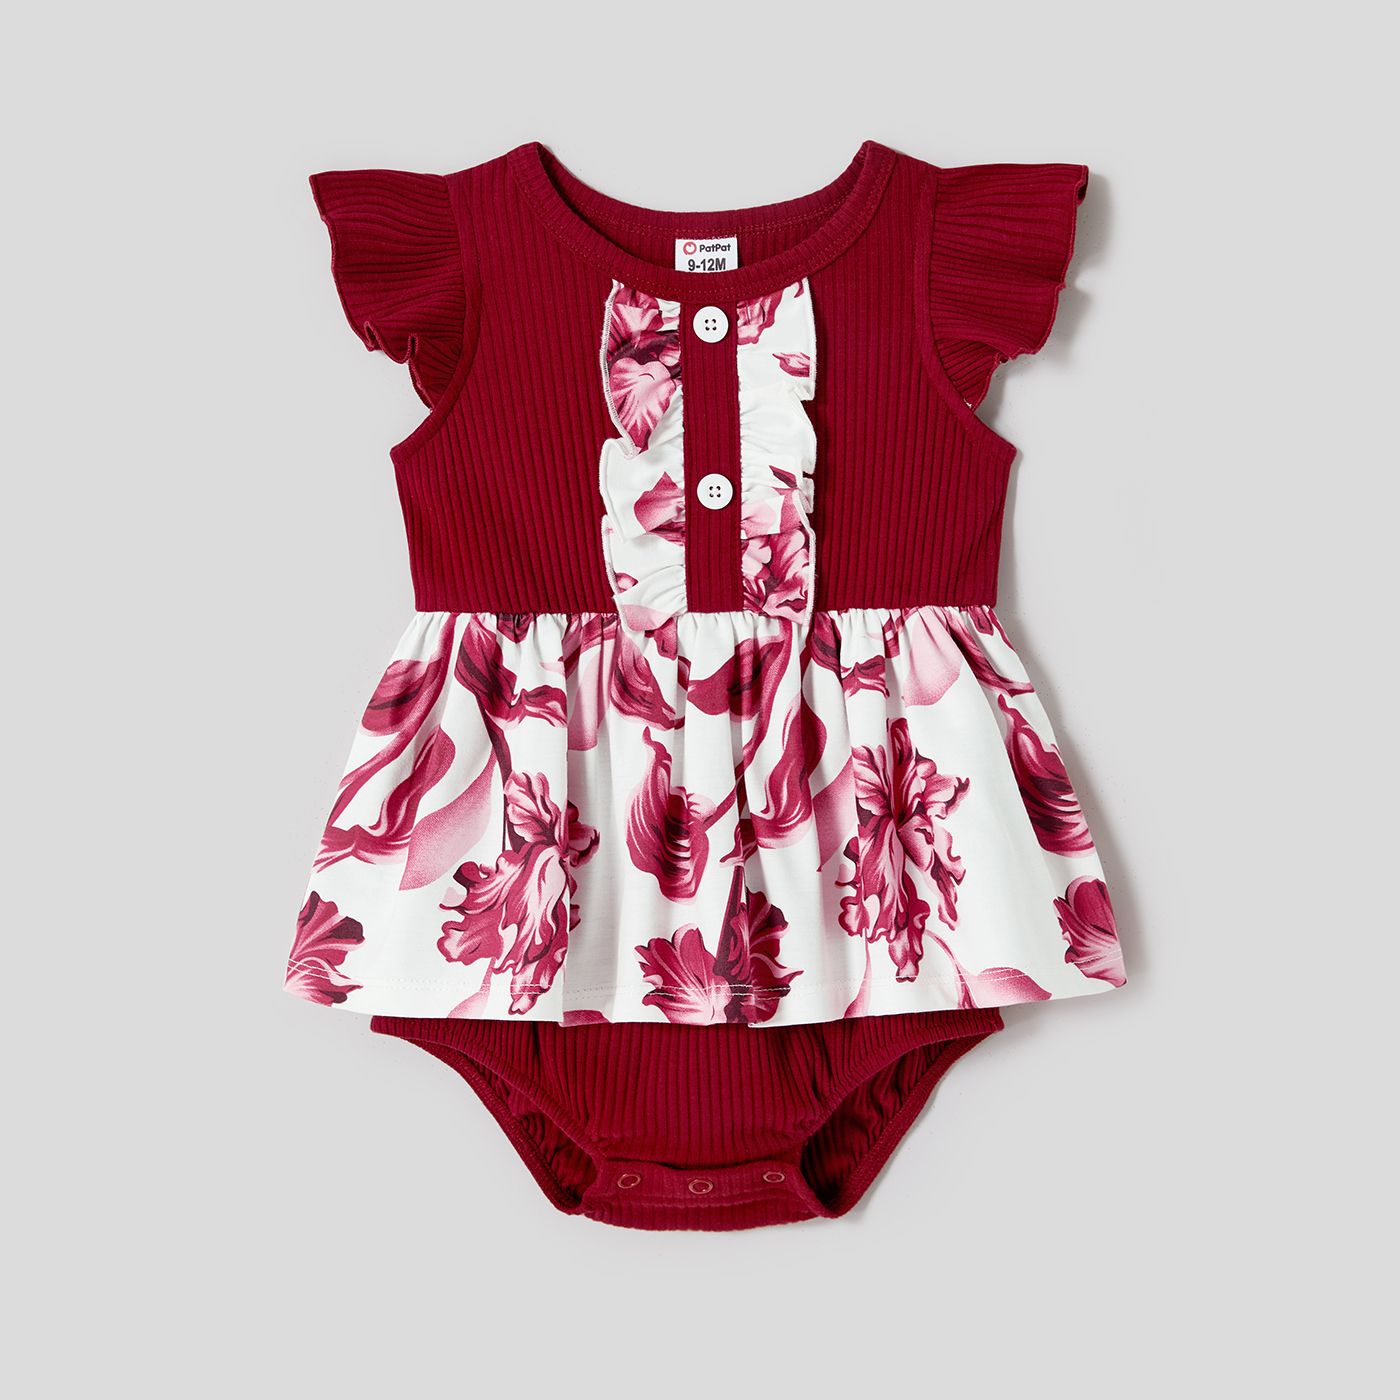 Family Matching Solid Ribbed Spliced Floral Print Naiaâ¢ Dresses And Short-sleeve T-shirts Sets